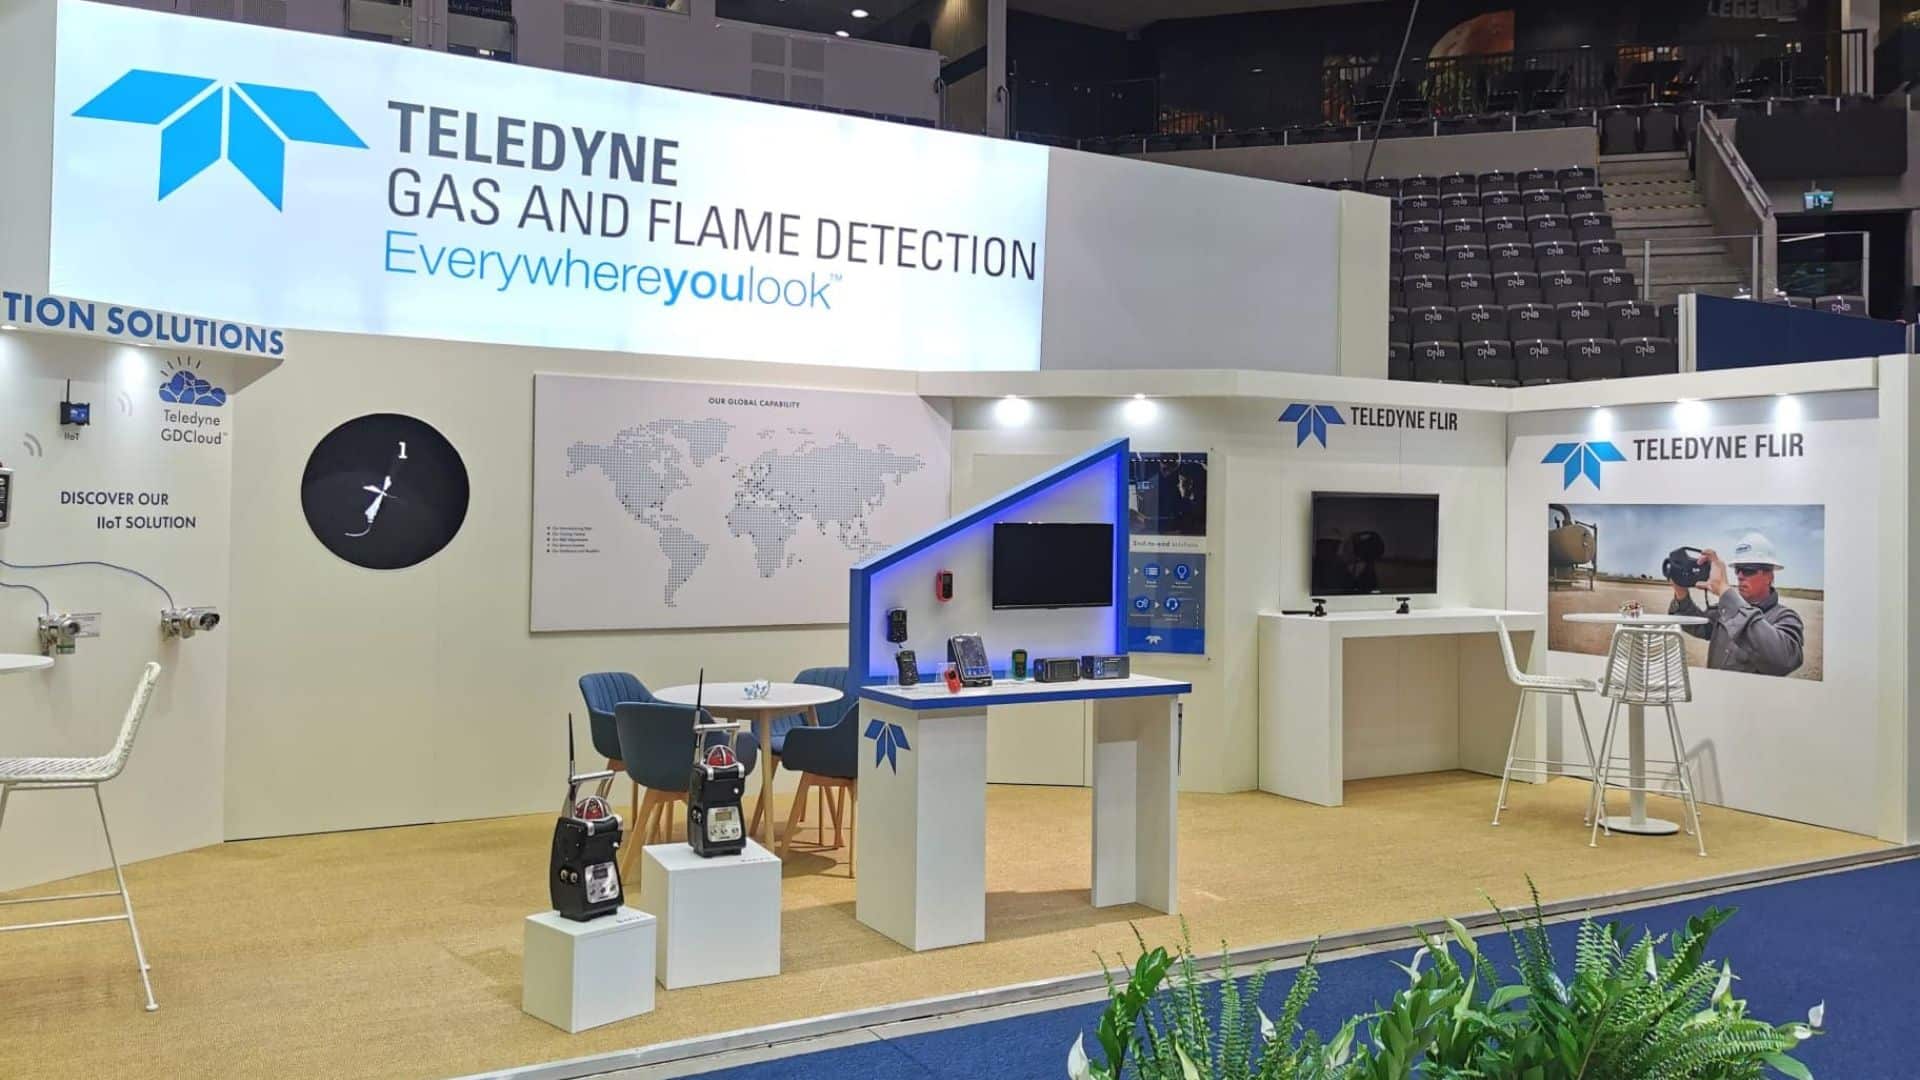 Teledyne Gas and Flame Detection